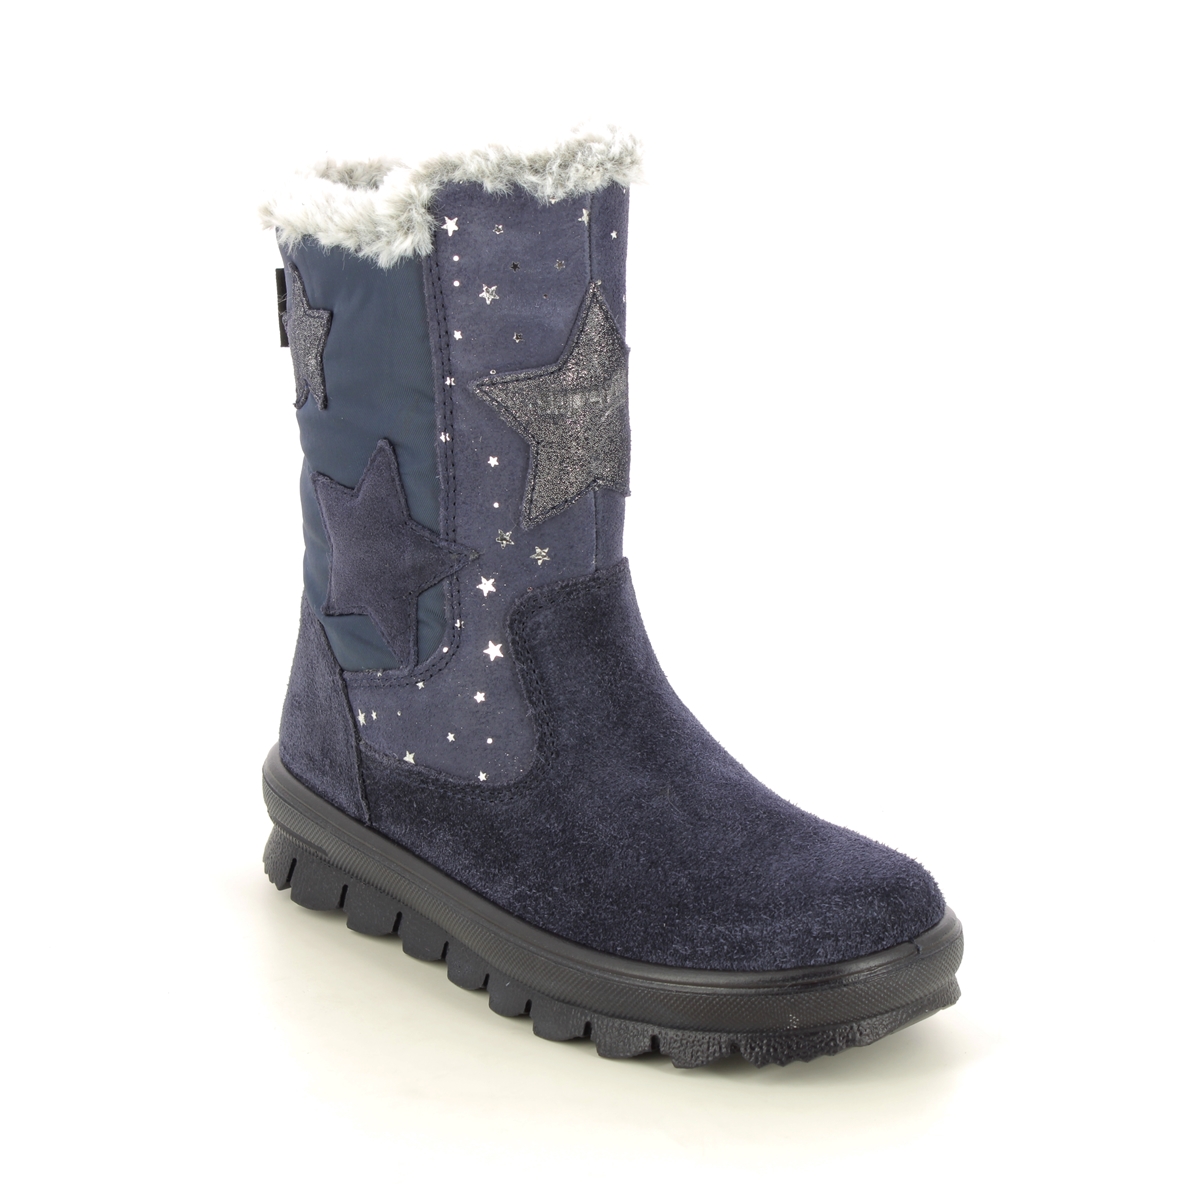 Superfit Flavia Star Gtx Navy Suede Kids Girls Boots 1000219-8000 In Size 31 In Plain Navy Suede For kids